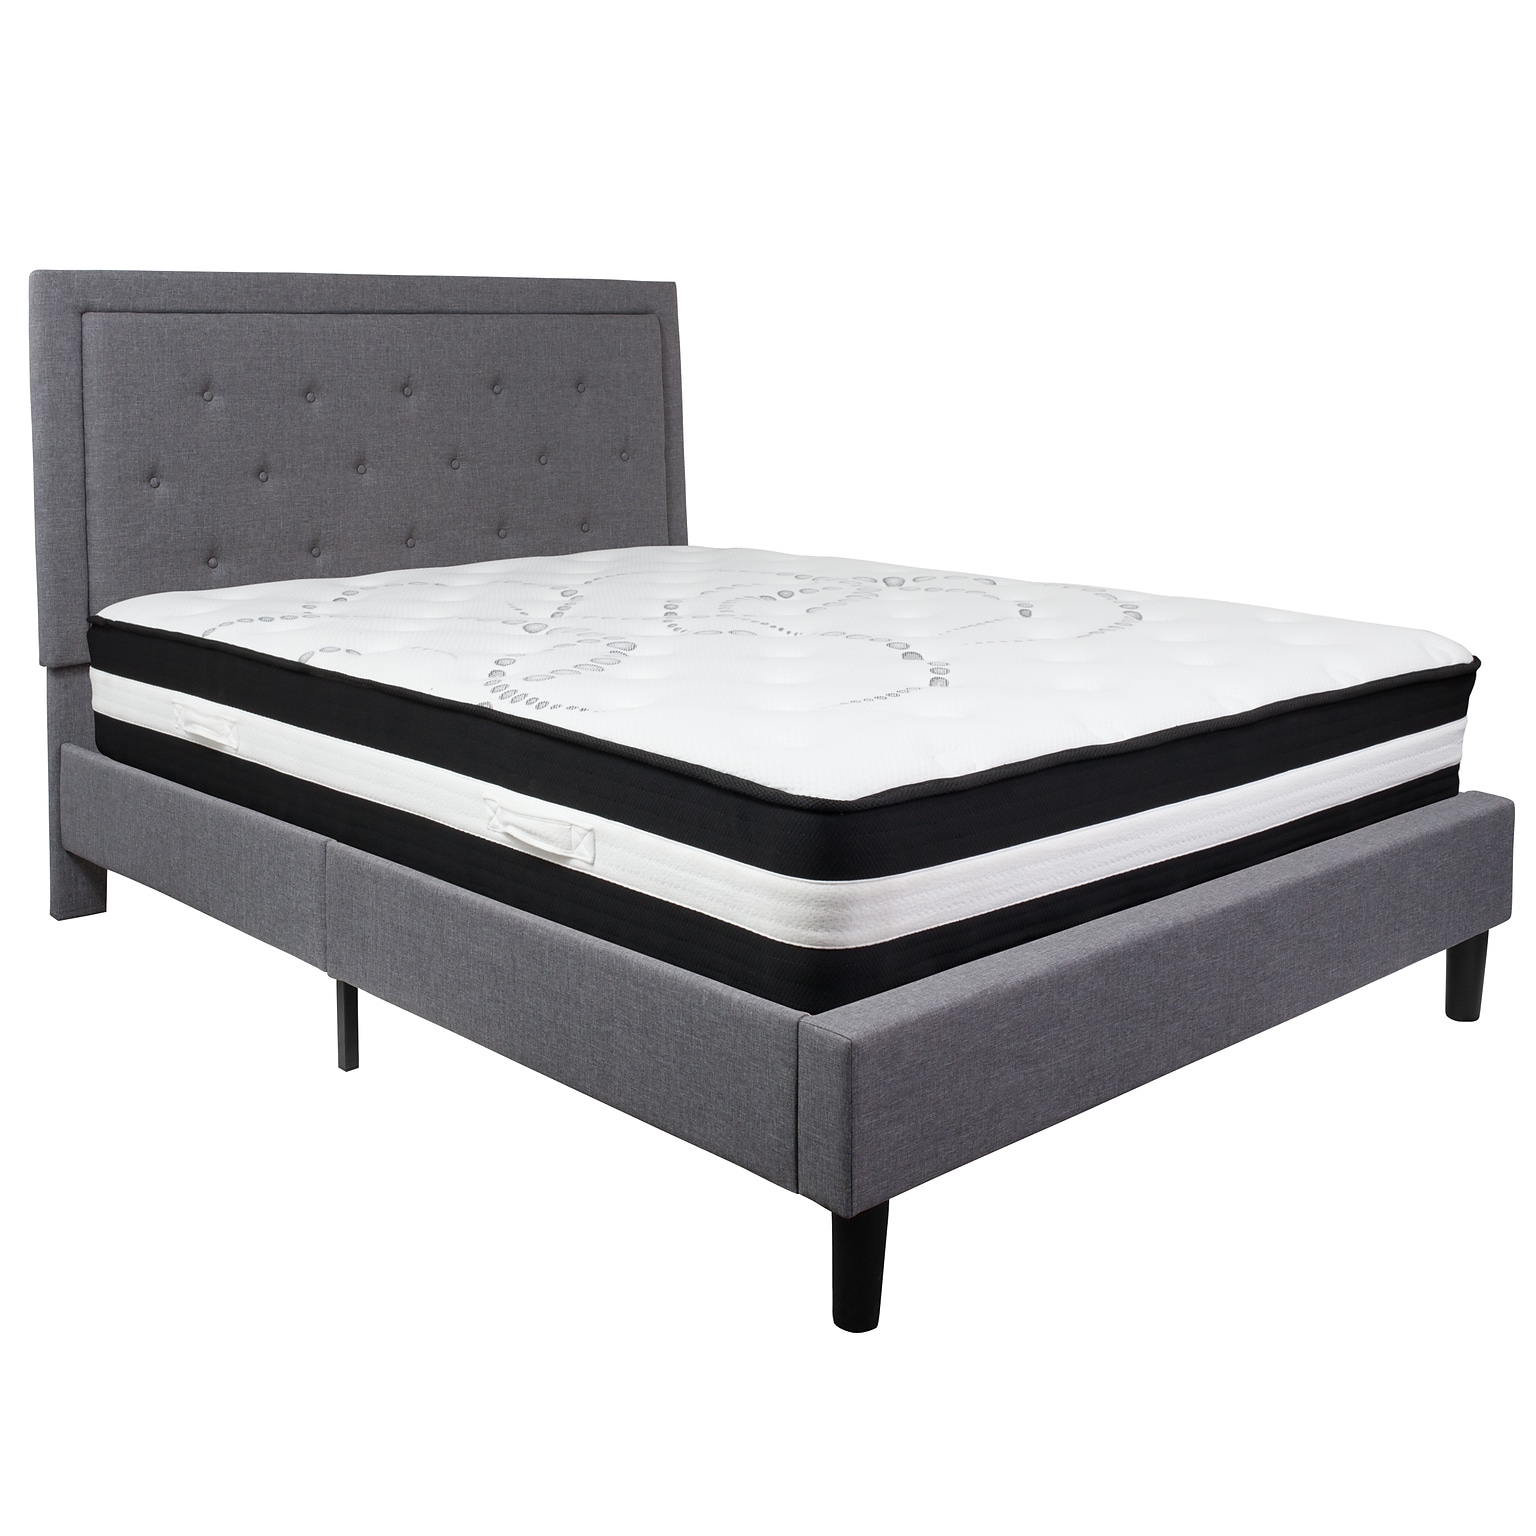 Flash Furniture Roxbury Tufted Upholstered Platform Bed in Light Gray Fabric with Pocket Spring Mattress, Queen (SLBM27)